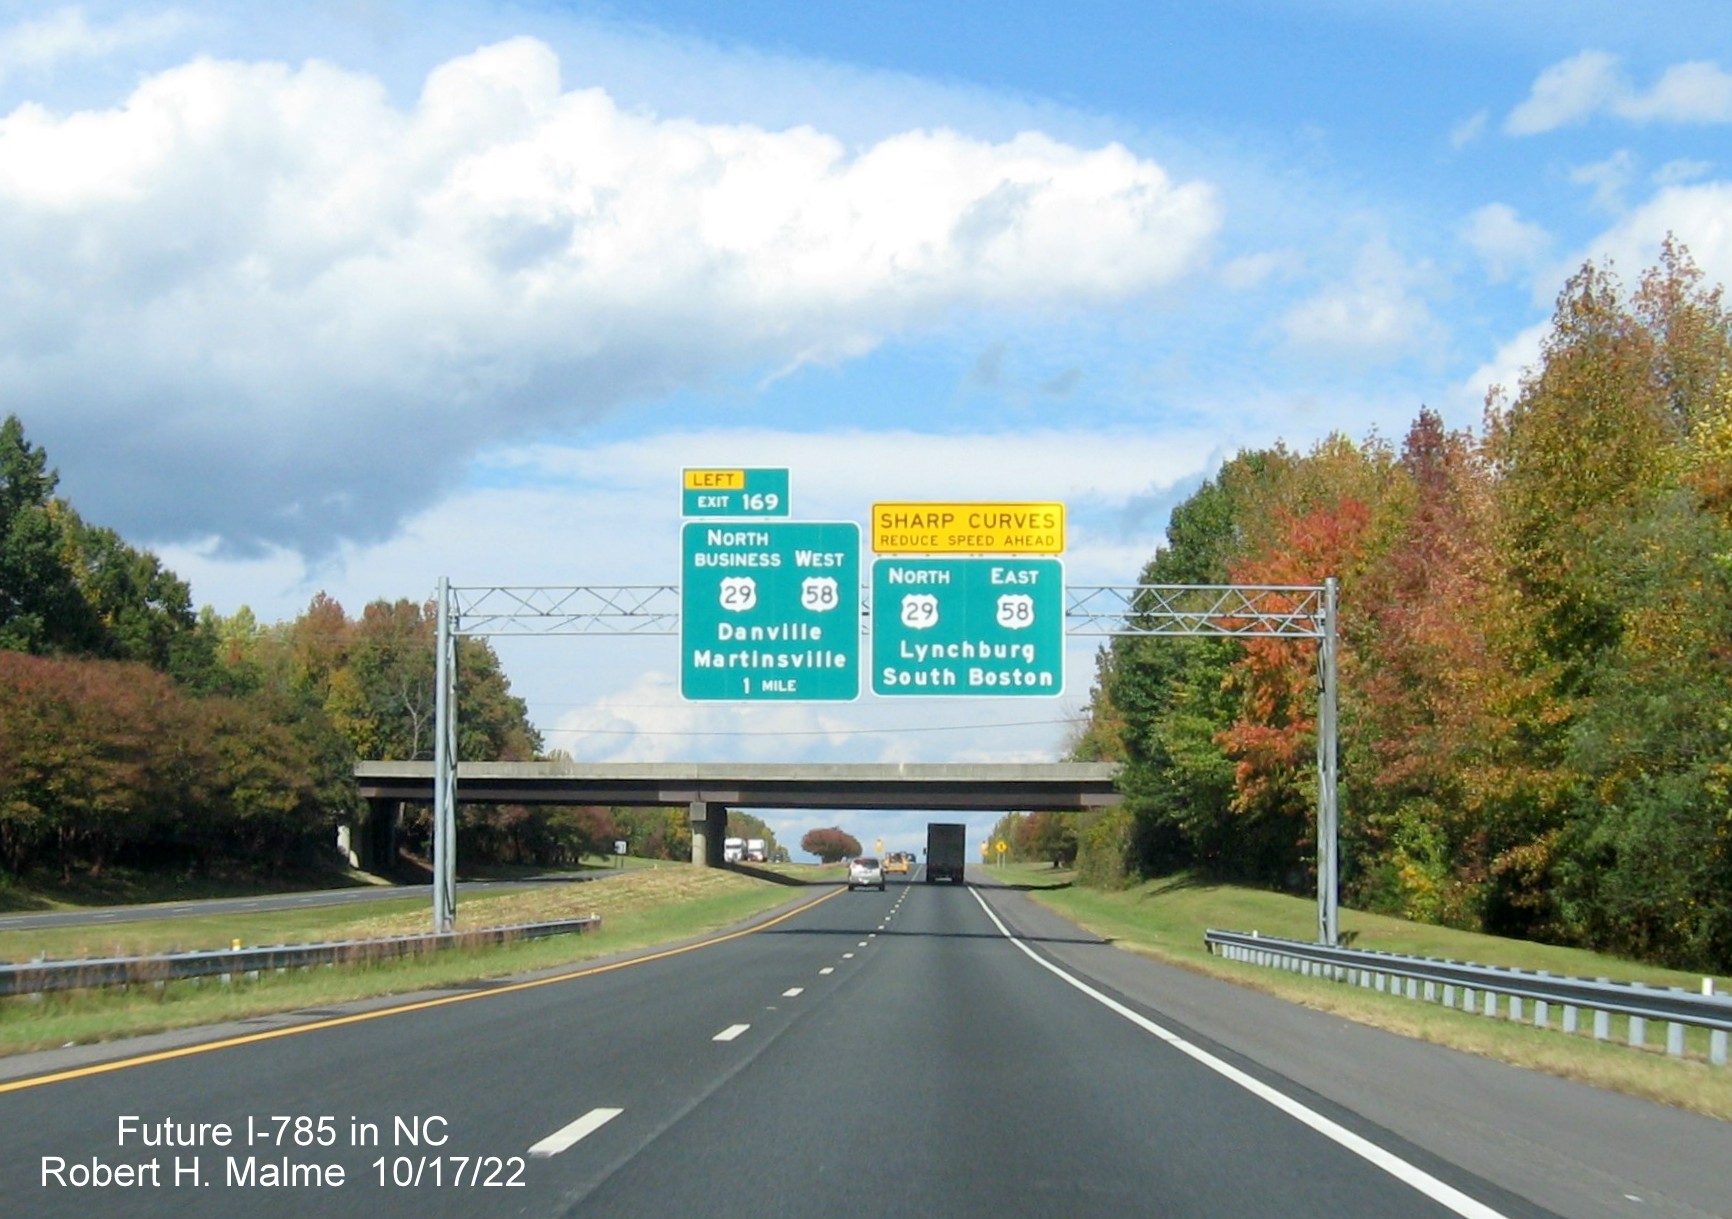 Image of 1 mile advance overhead sign for the US 58 Danville Bypass exits on US 29 (Future I-785) North in Eden, October 2022